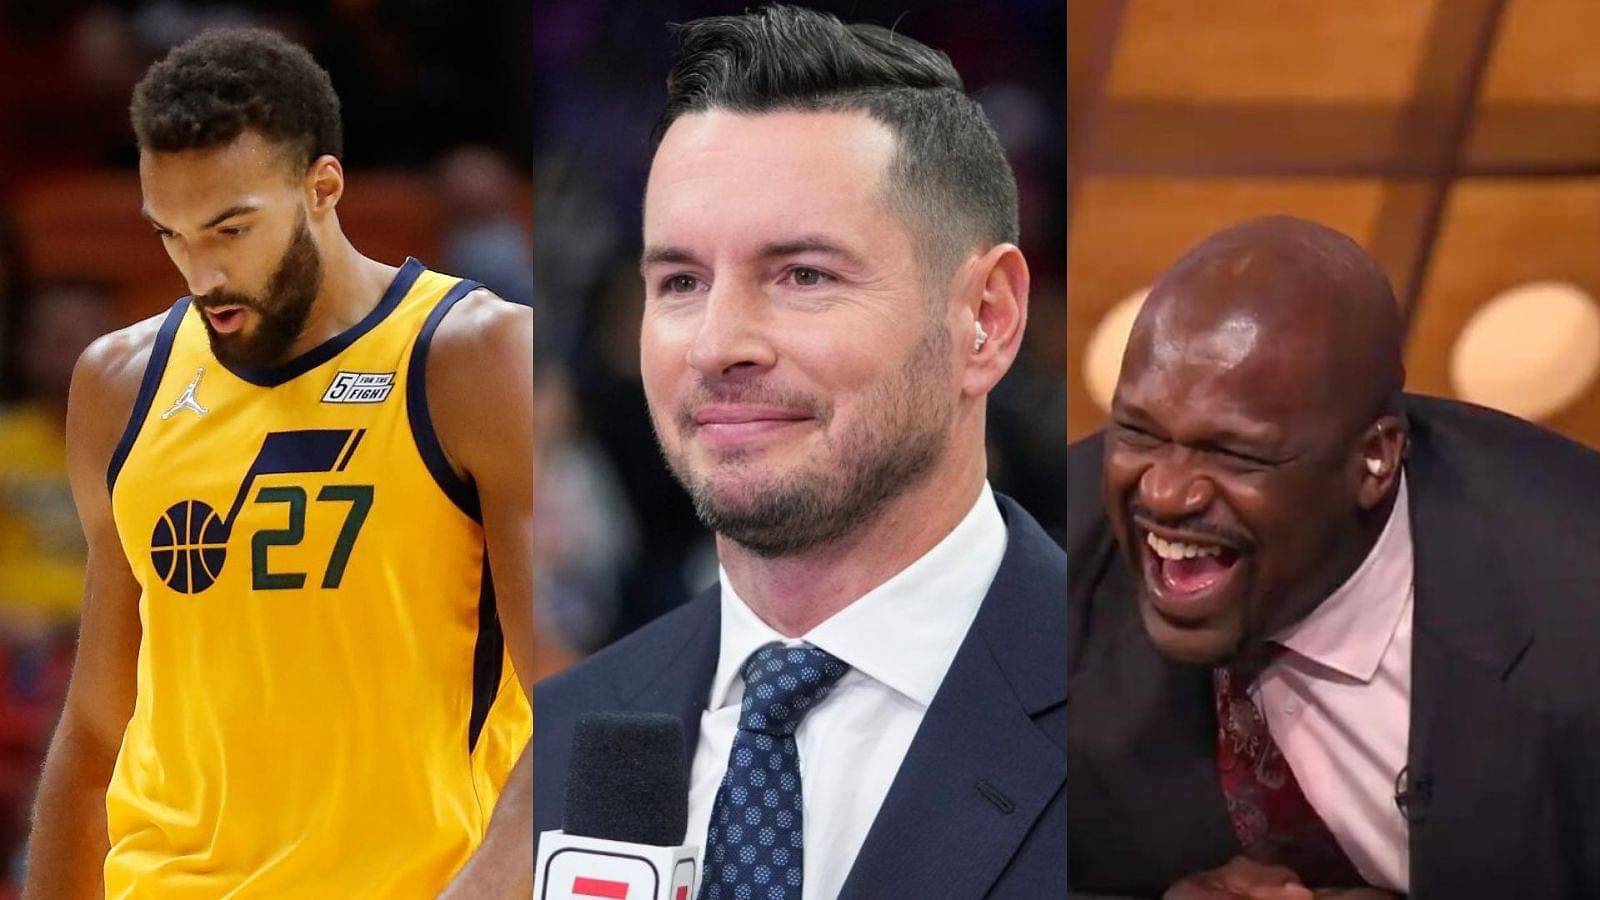 "Rudy Gobert would have ZERO chance against Shaquille O'Neal": JJ Redick doesn't think Jazz big man believes what he Tweeted out